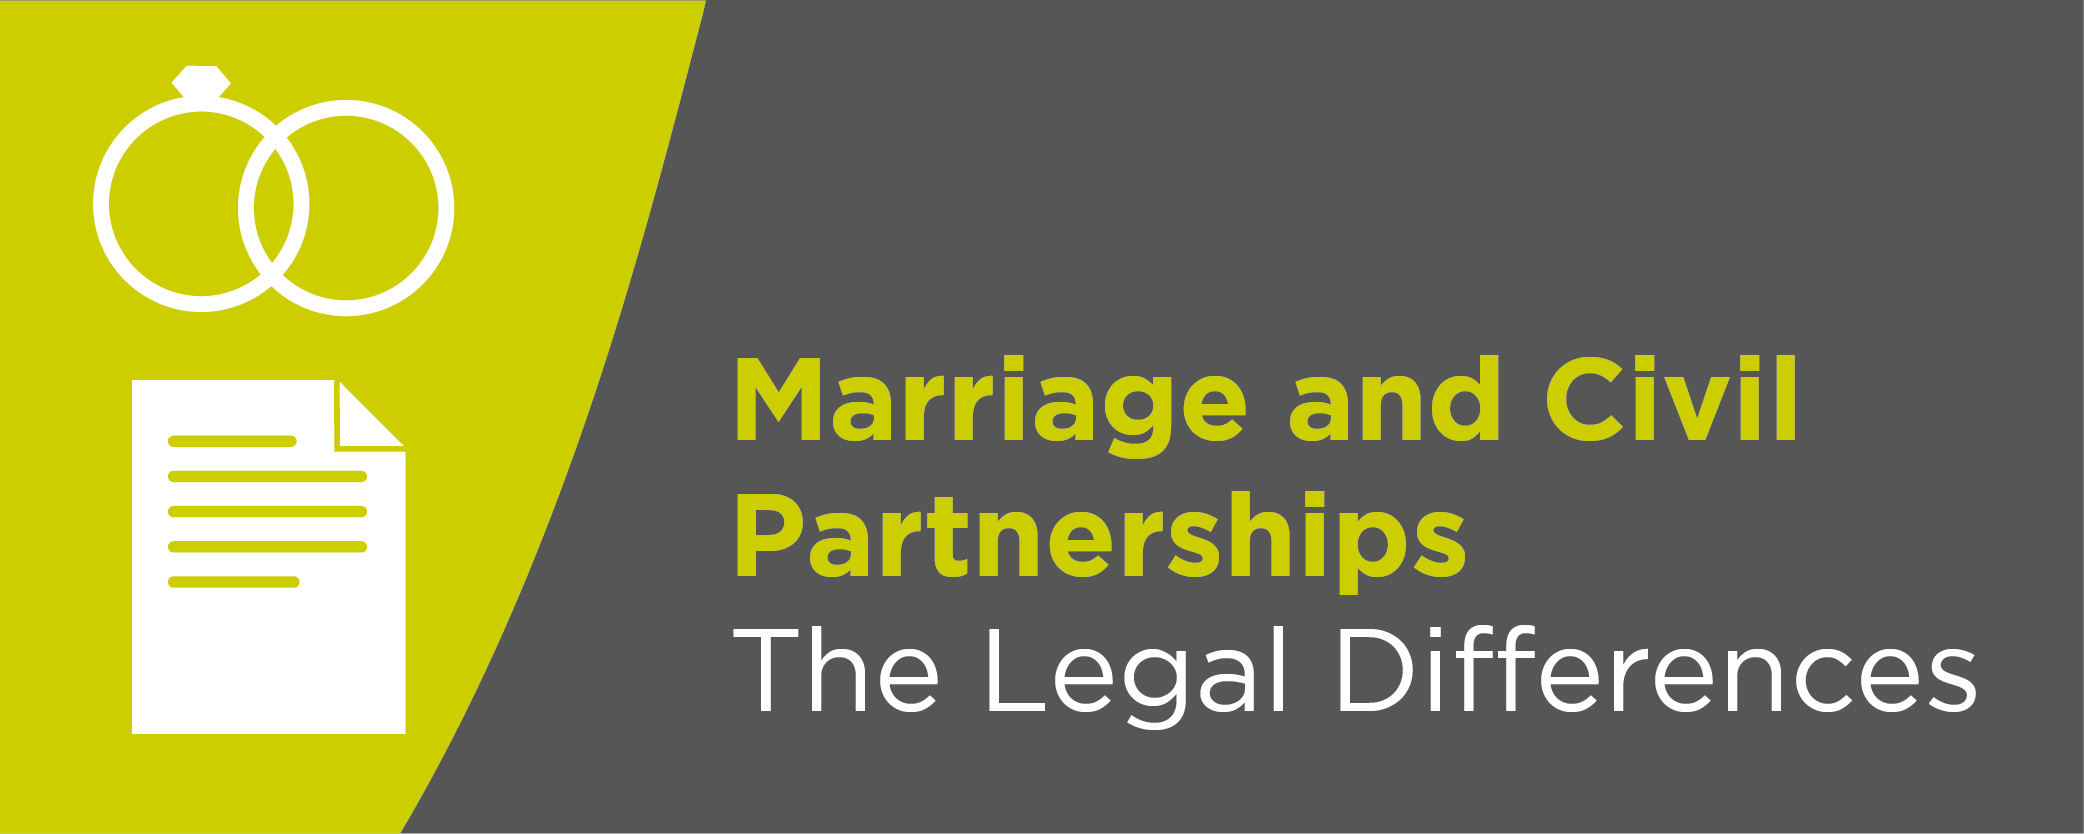 Marriage and Civil Partnerships:  The Legal Differences